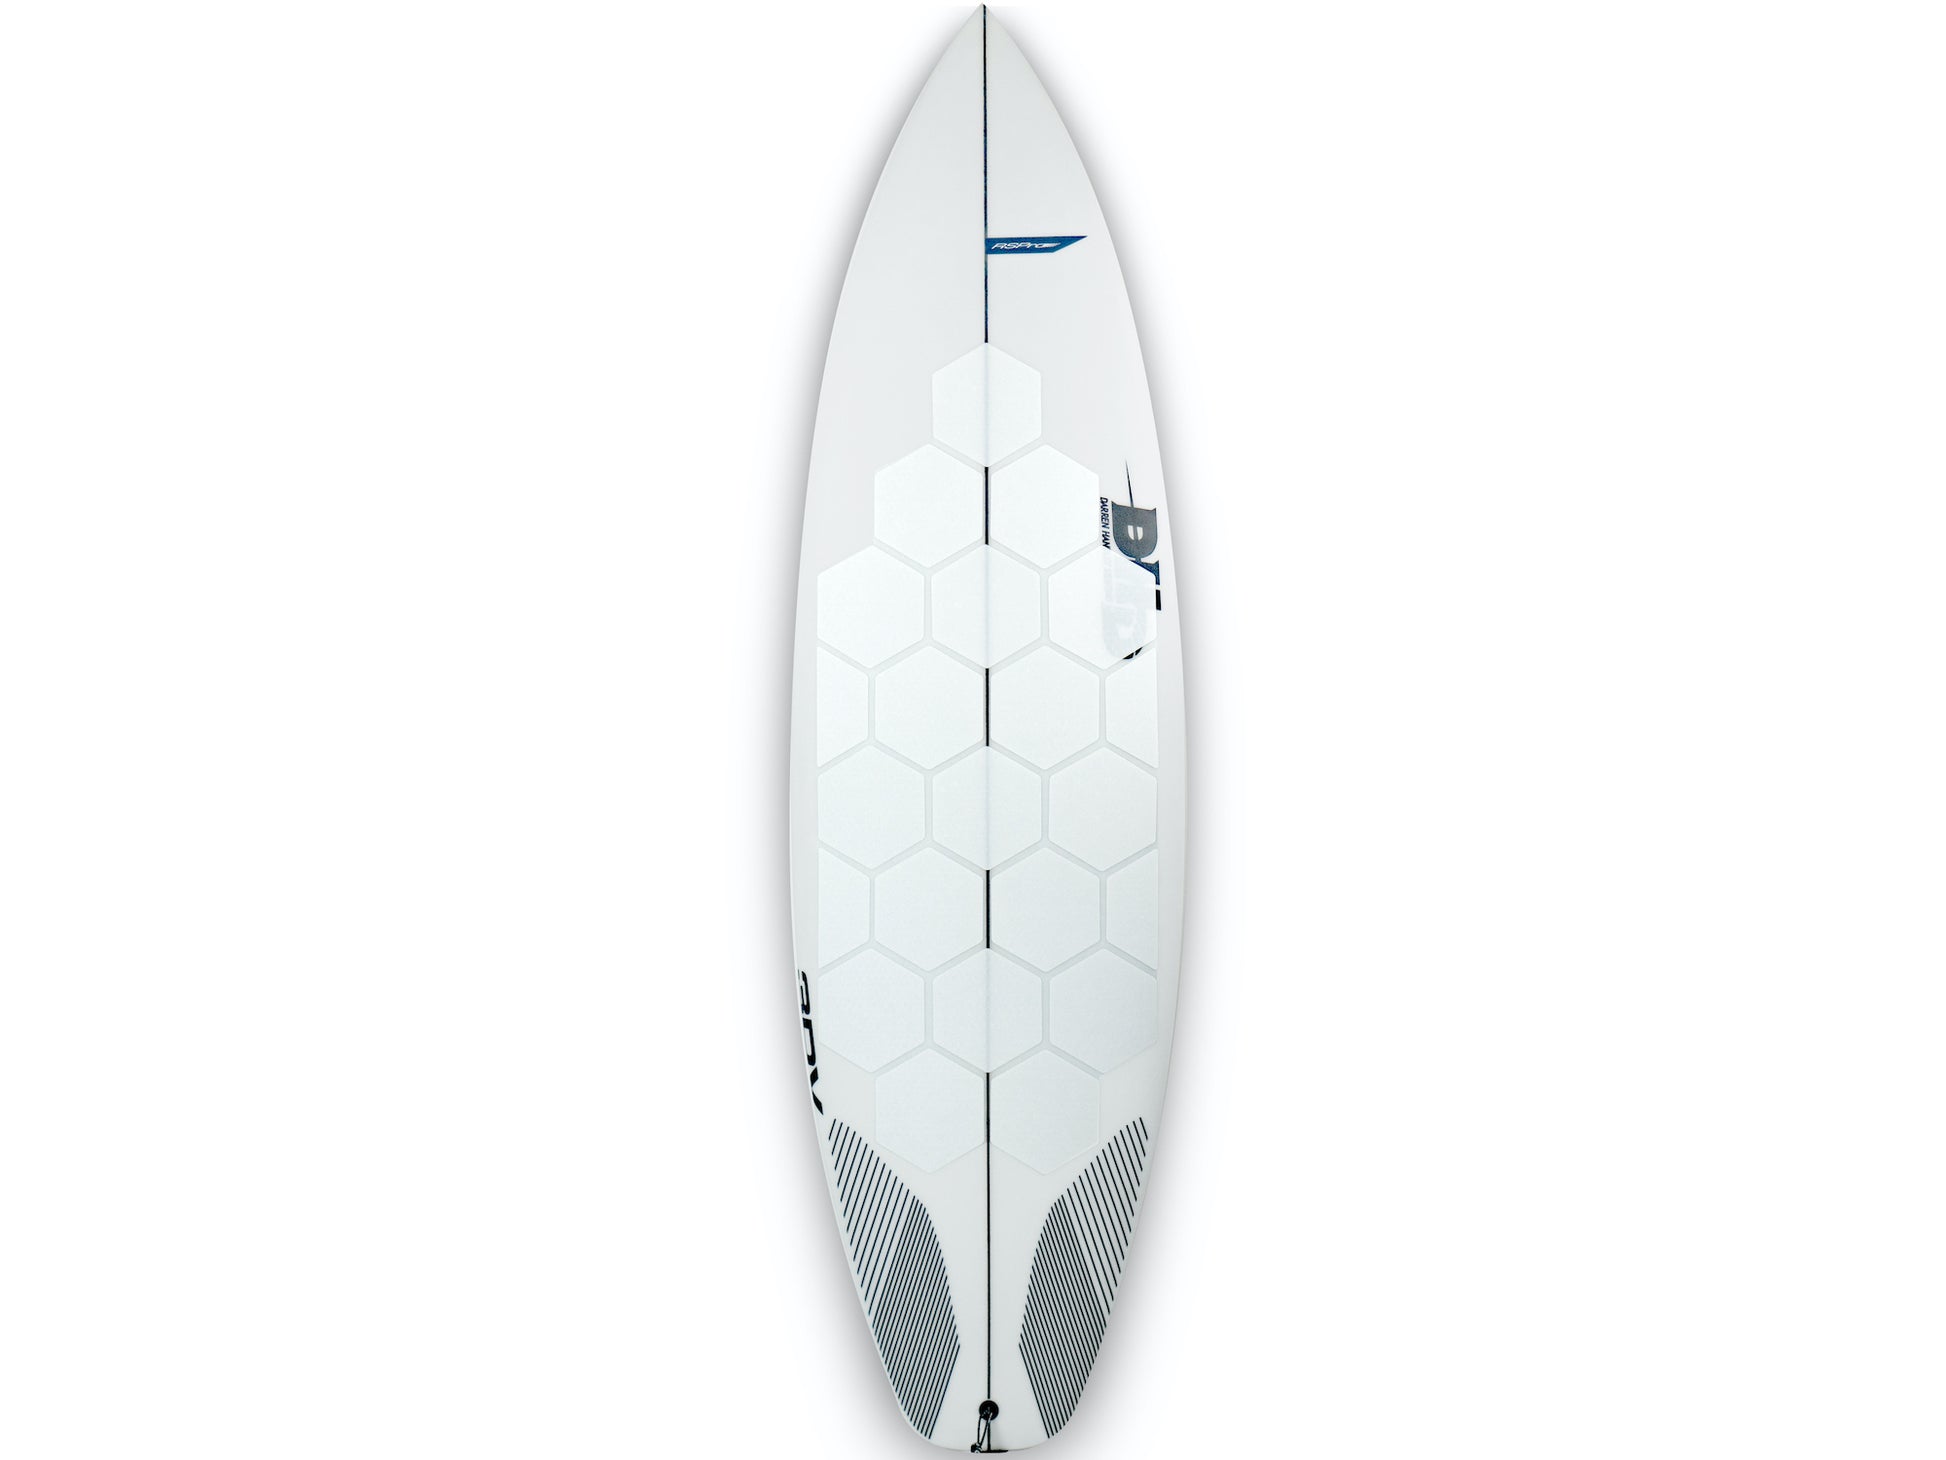 RSPro HexaTraction White edition on a DHD surfboard